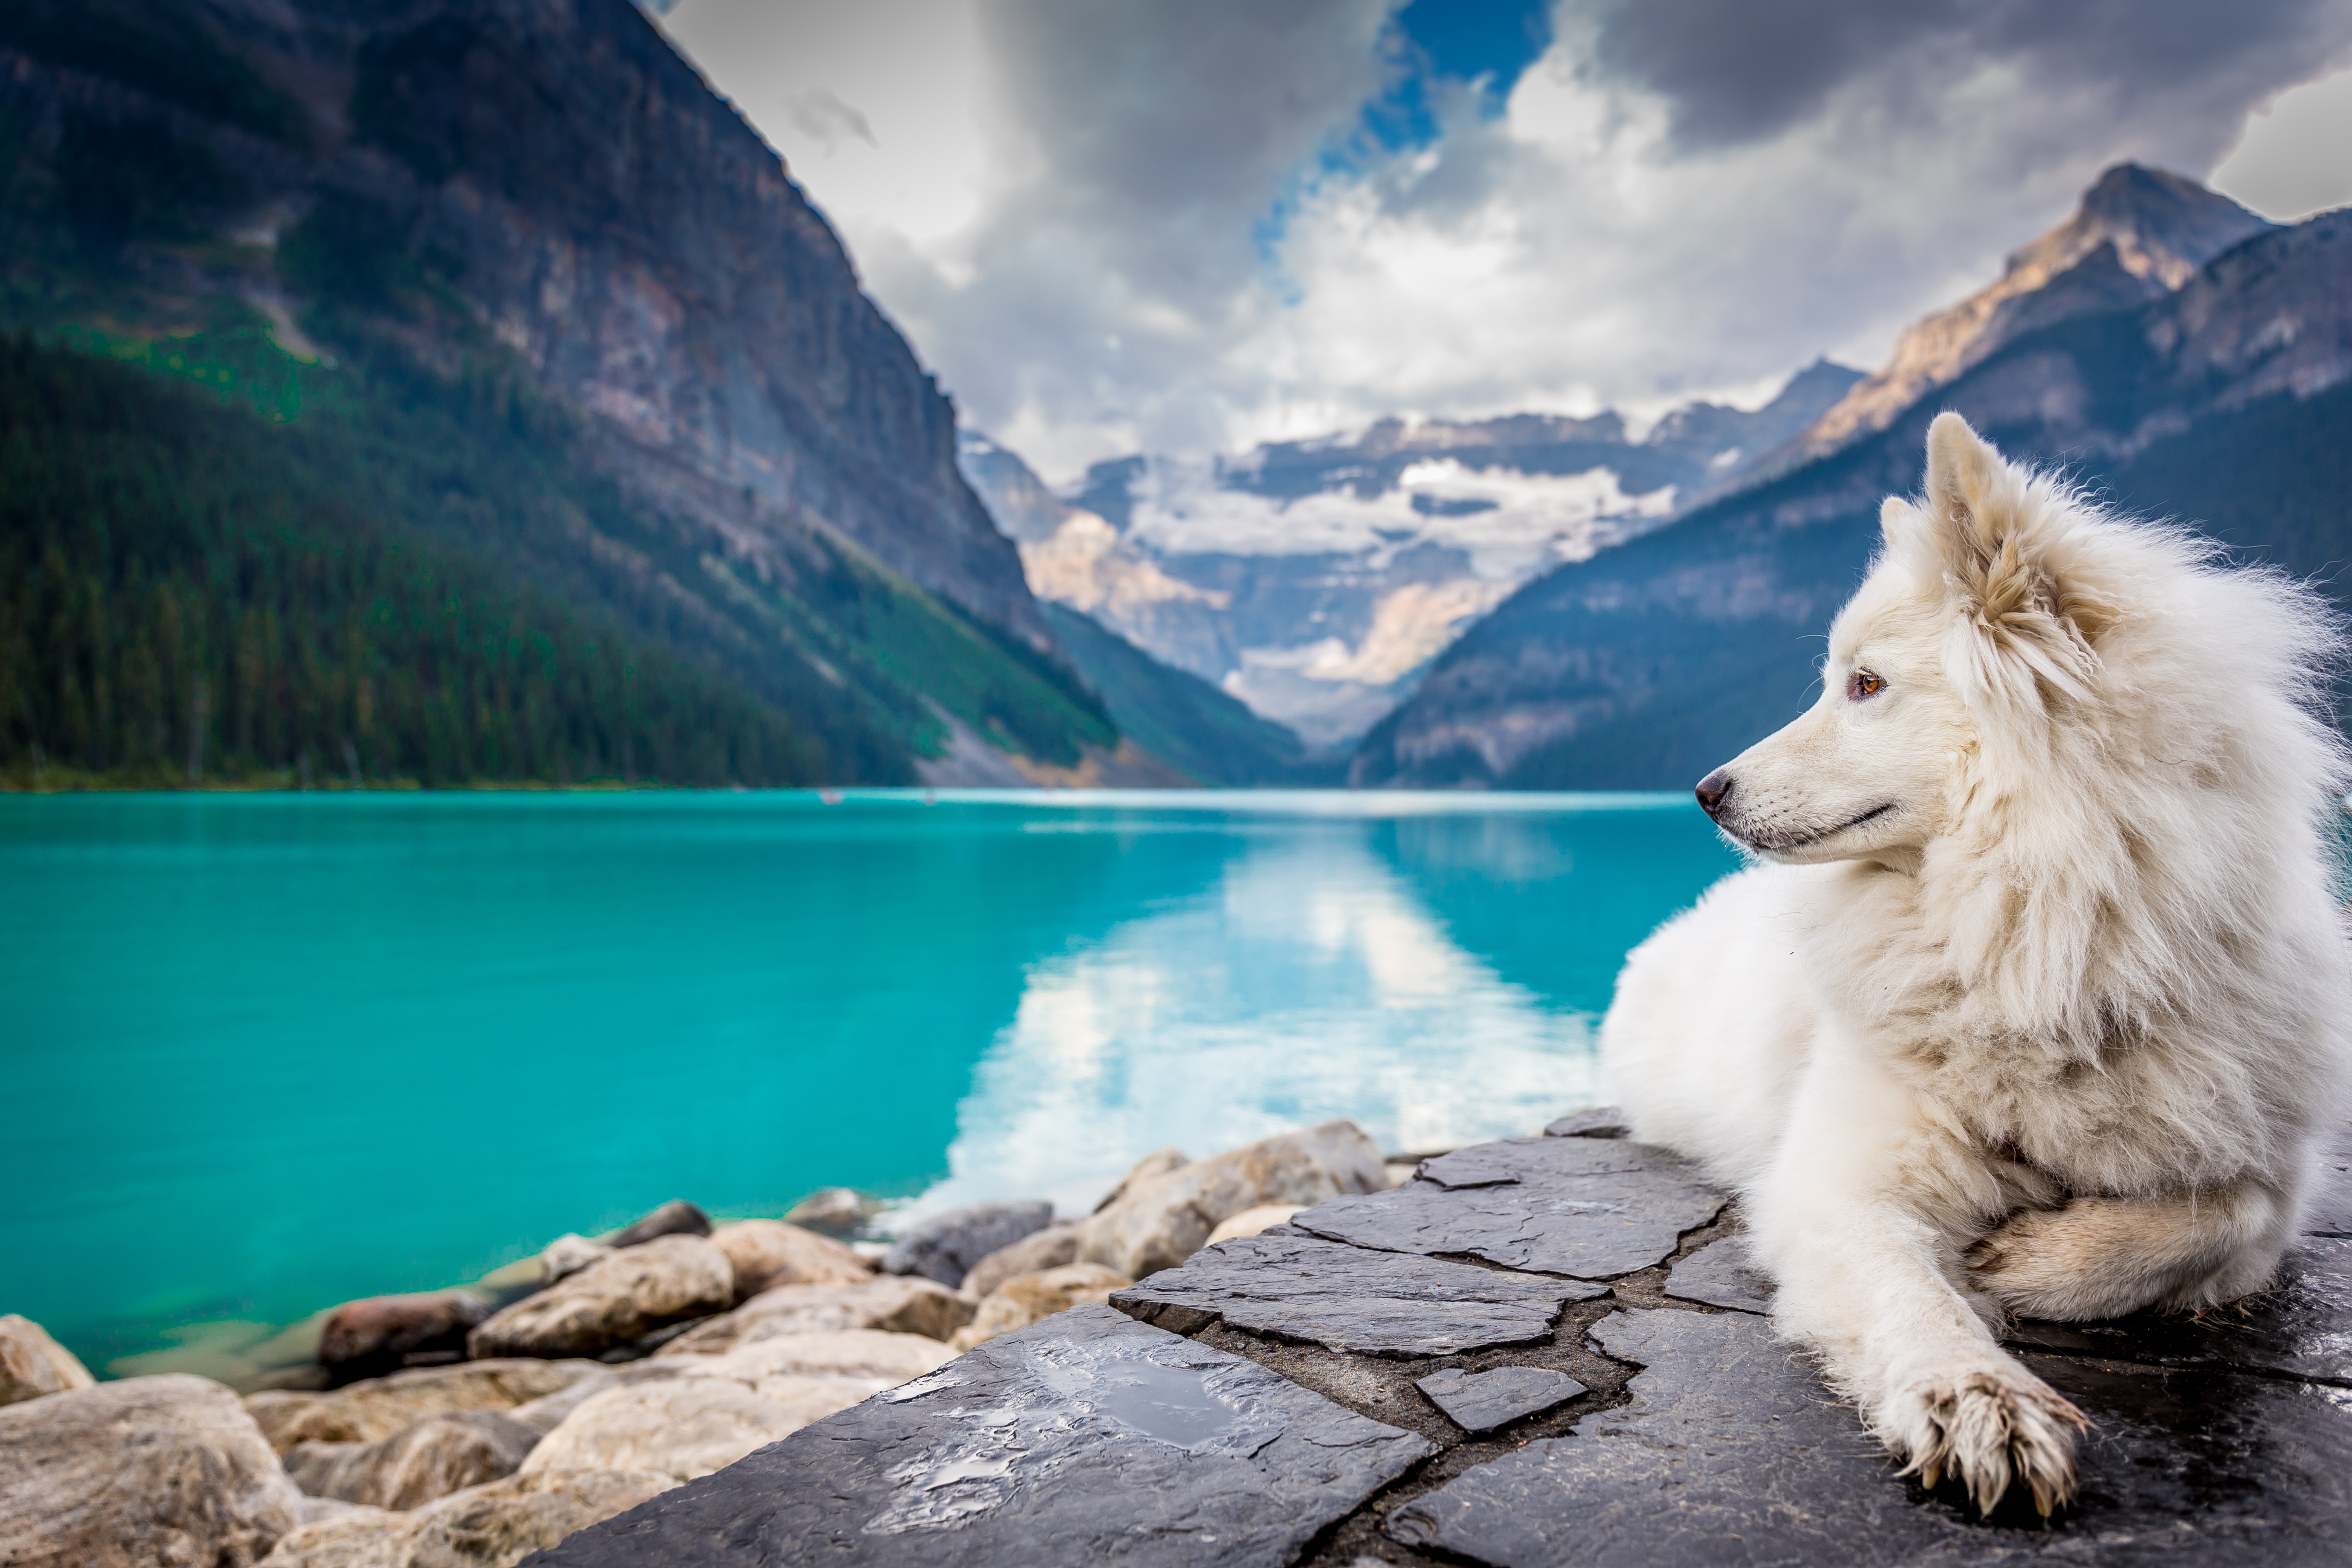 White Dog at Lake Louise, Canada by Jf Brou